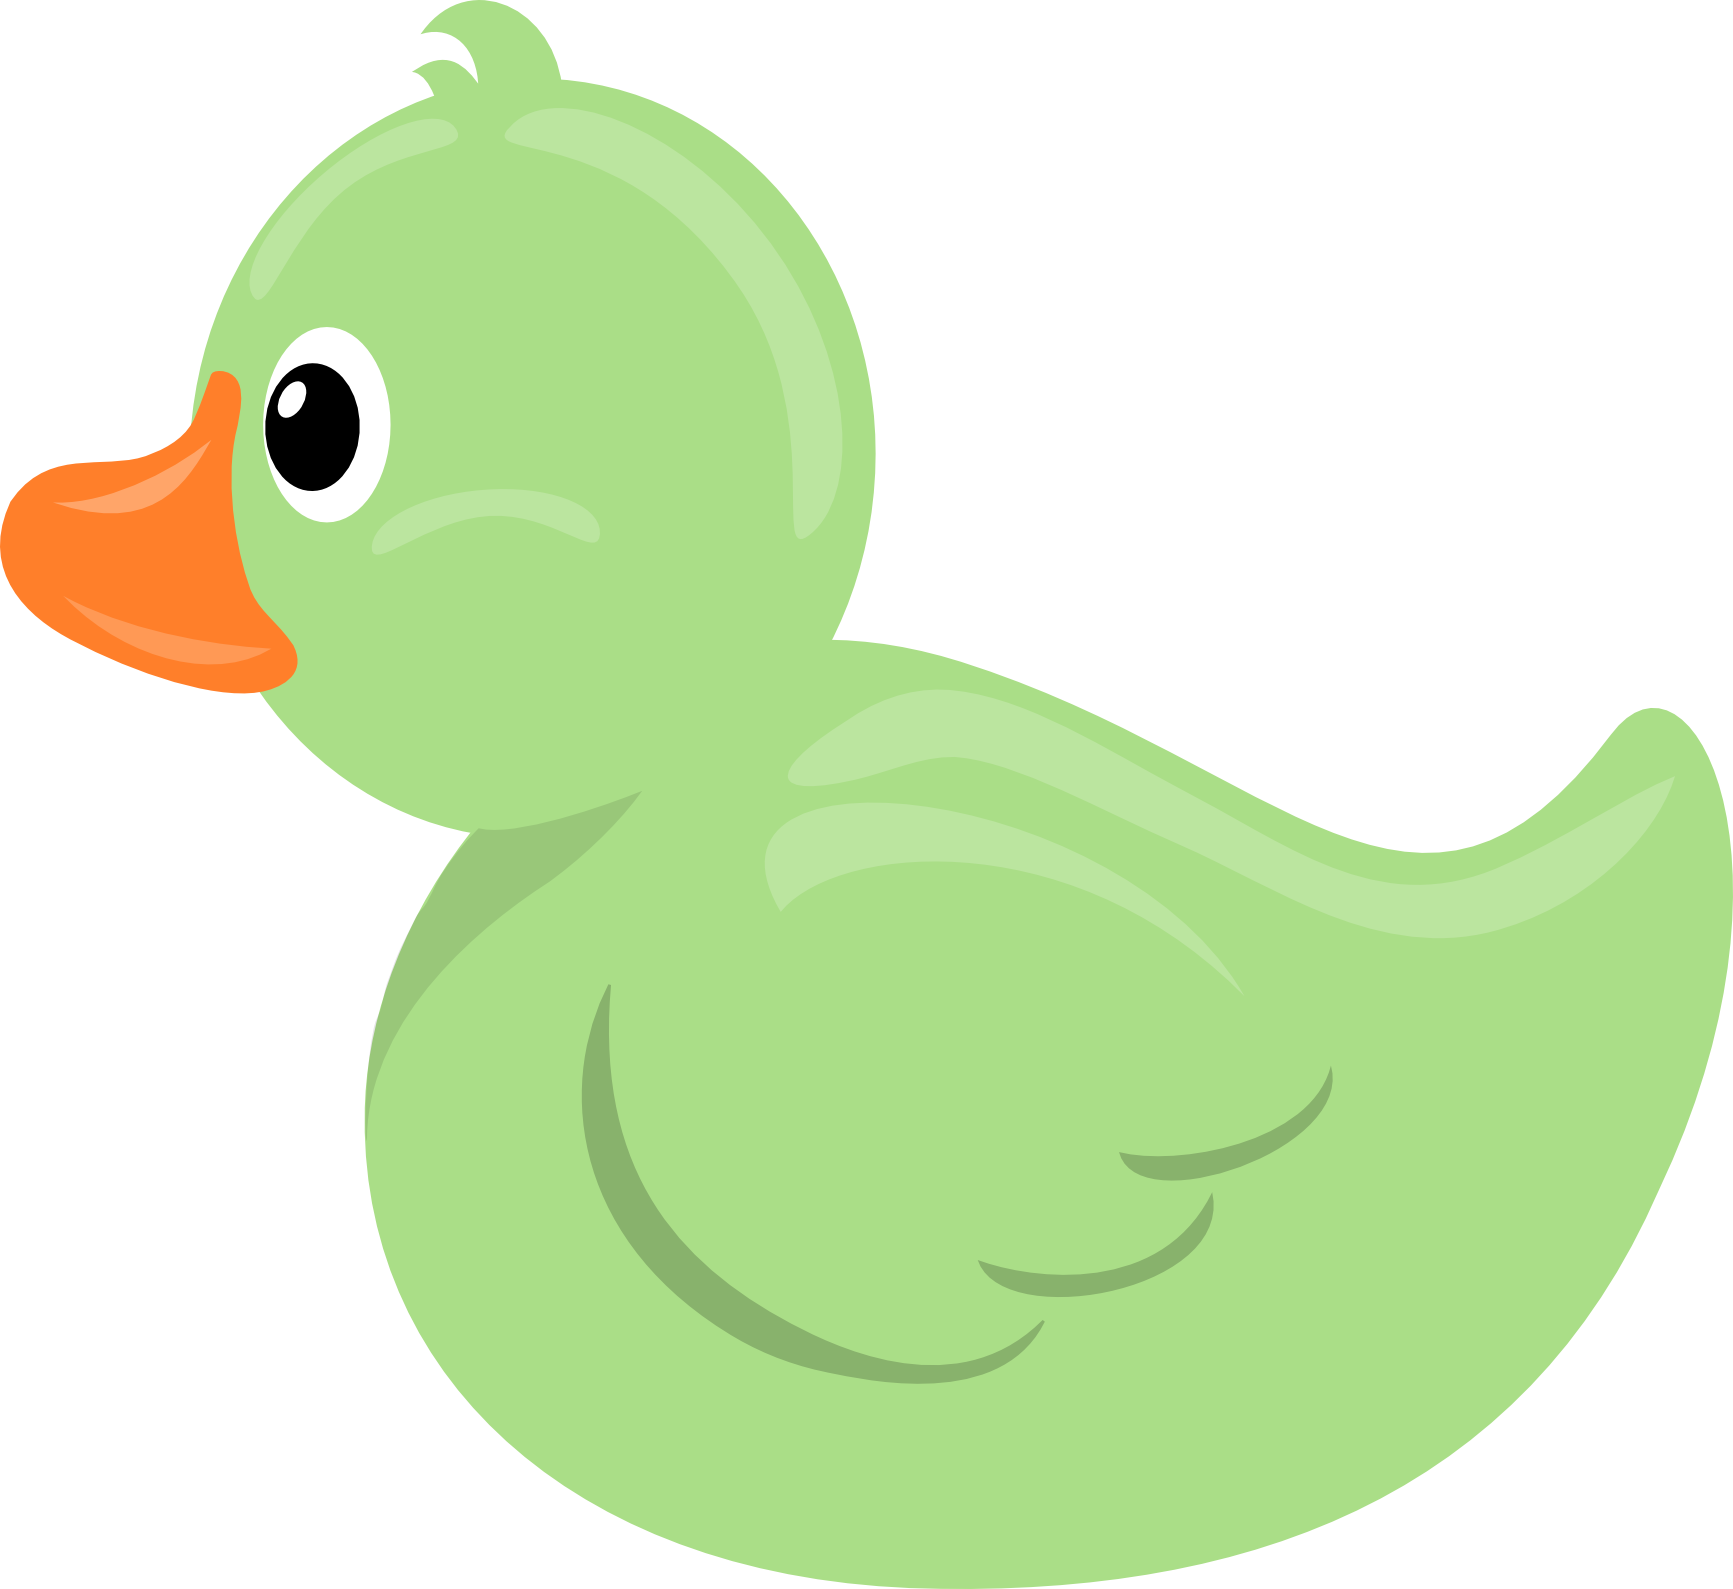 Duckling clipart duckie.  collection of green